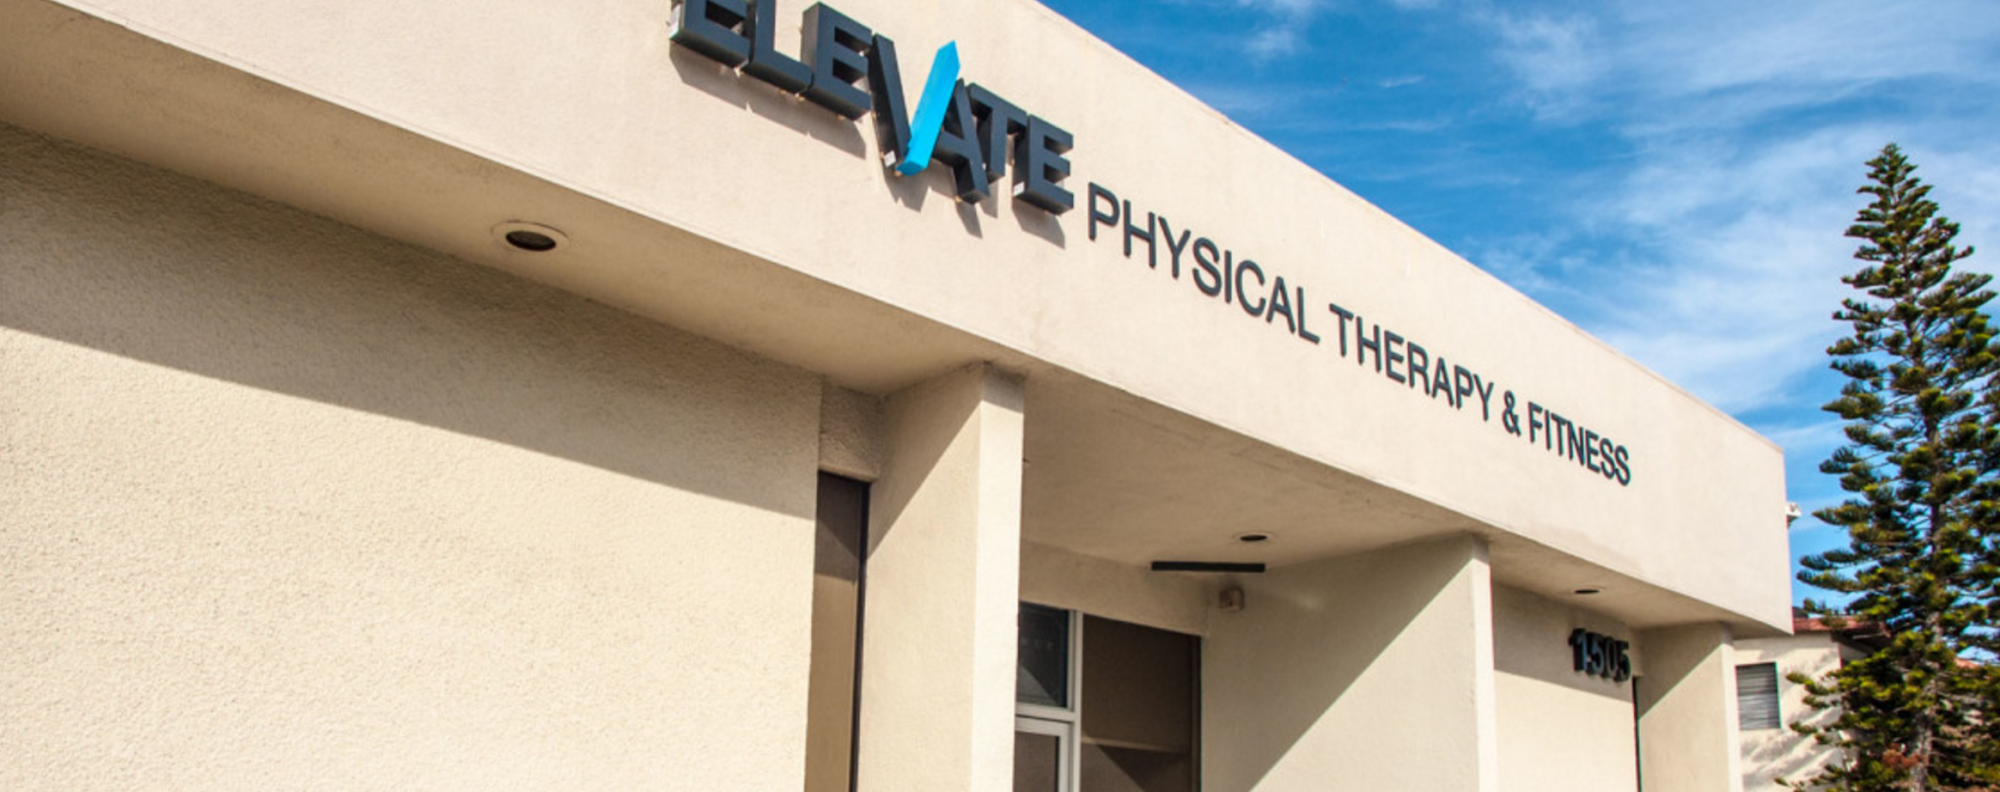 Elevate Physical Therapy & Fitness